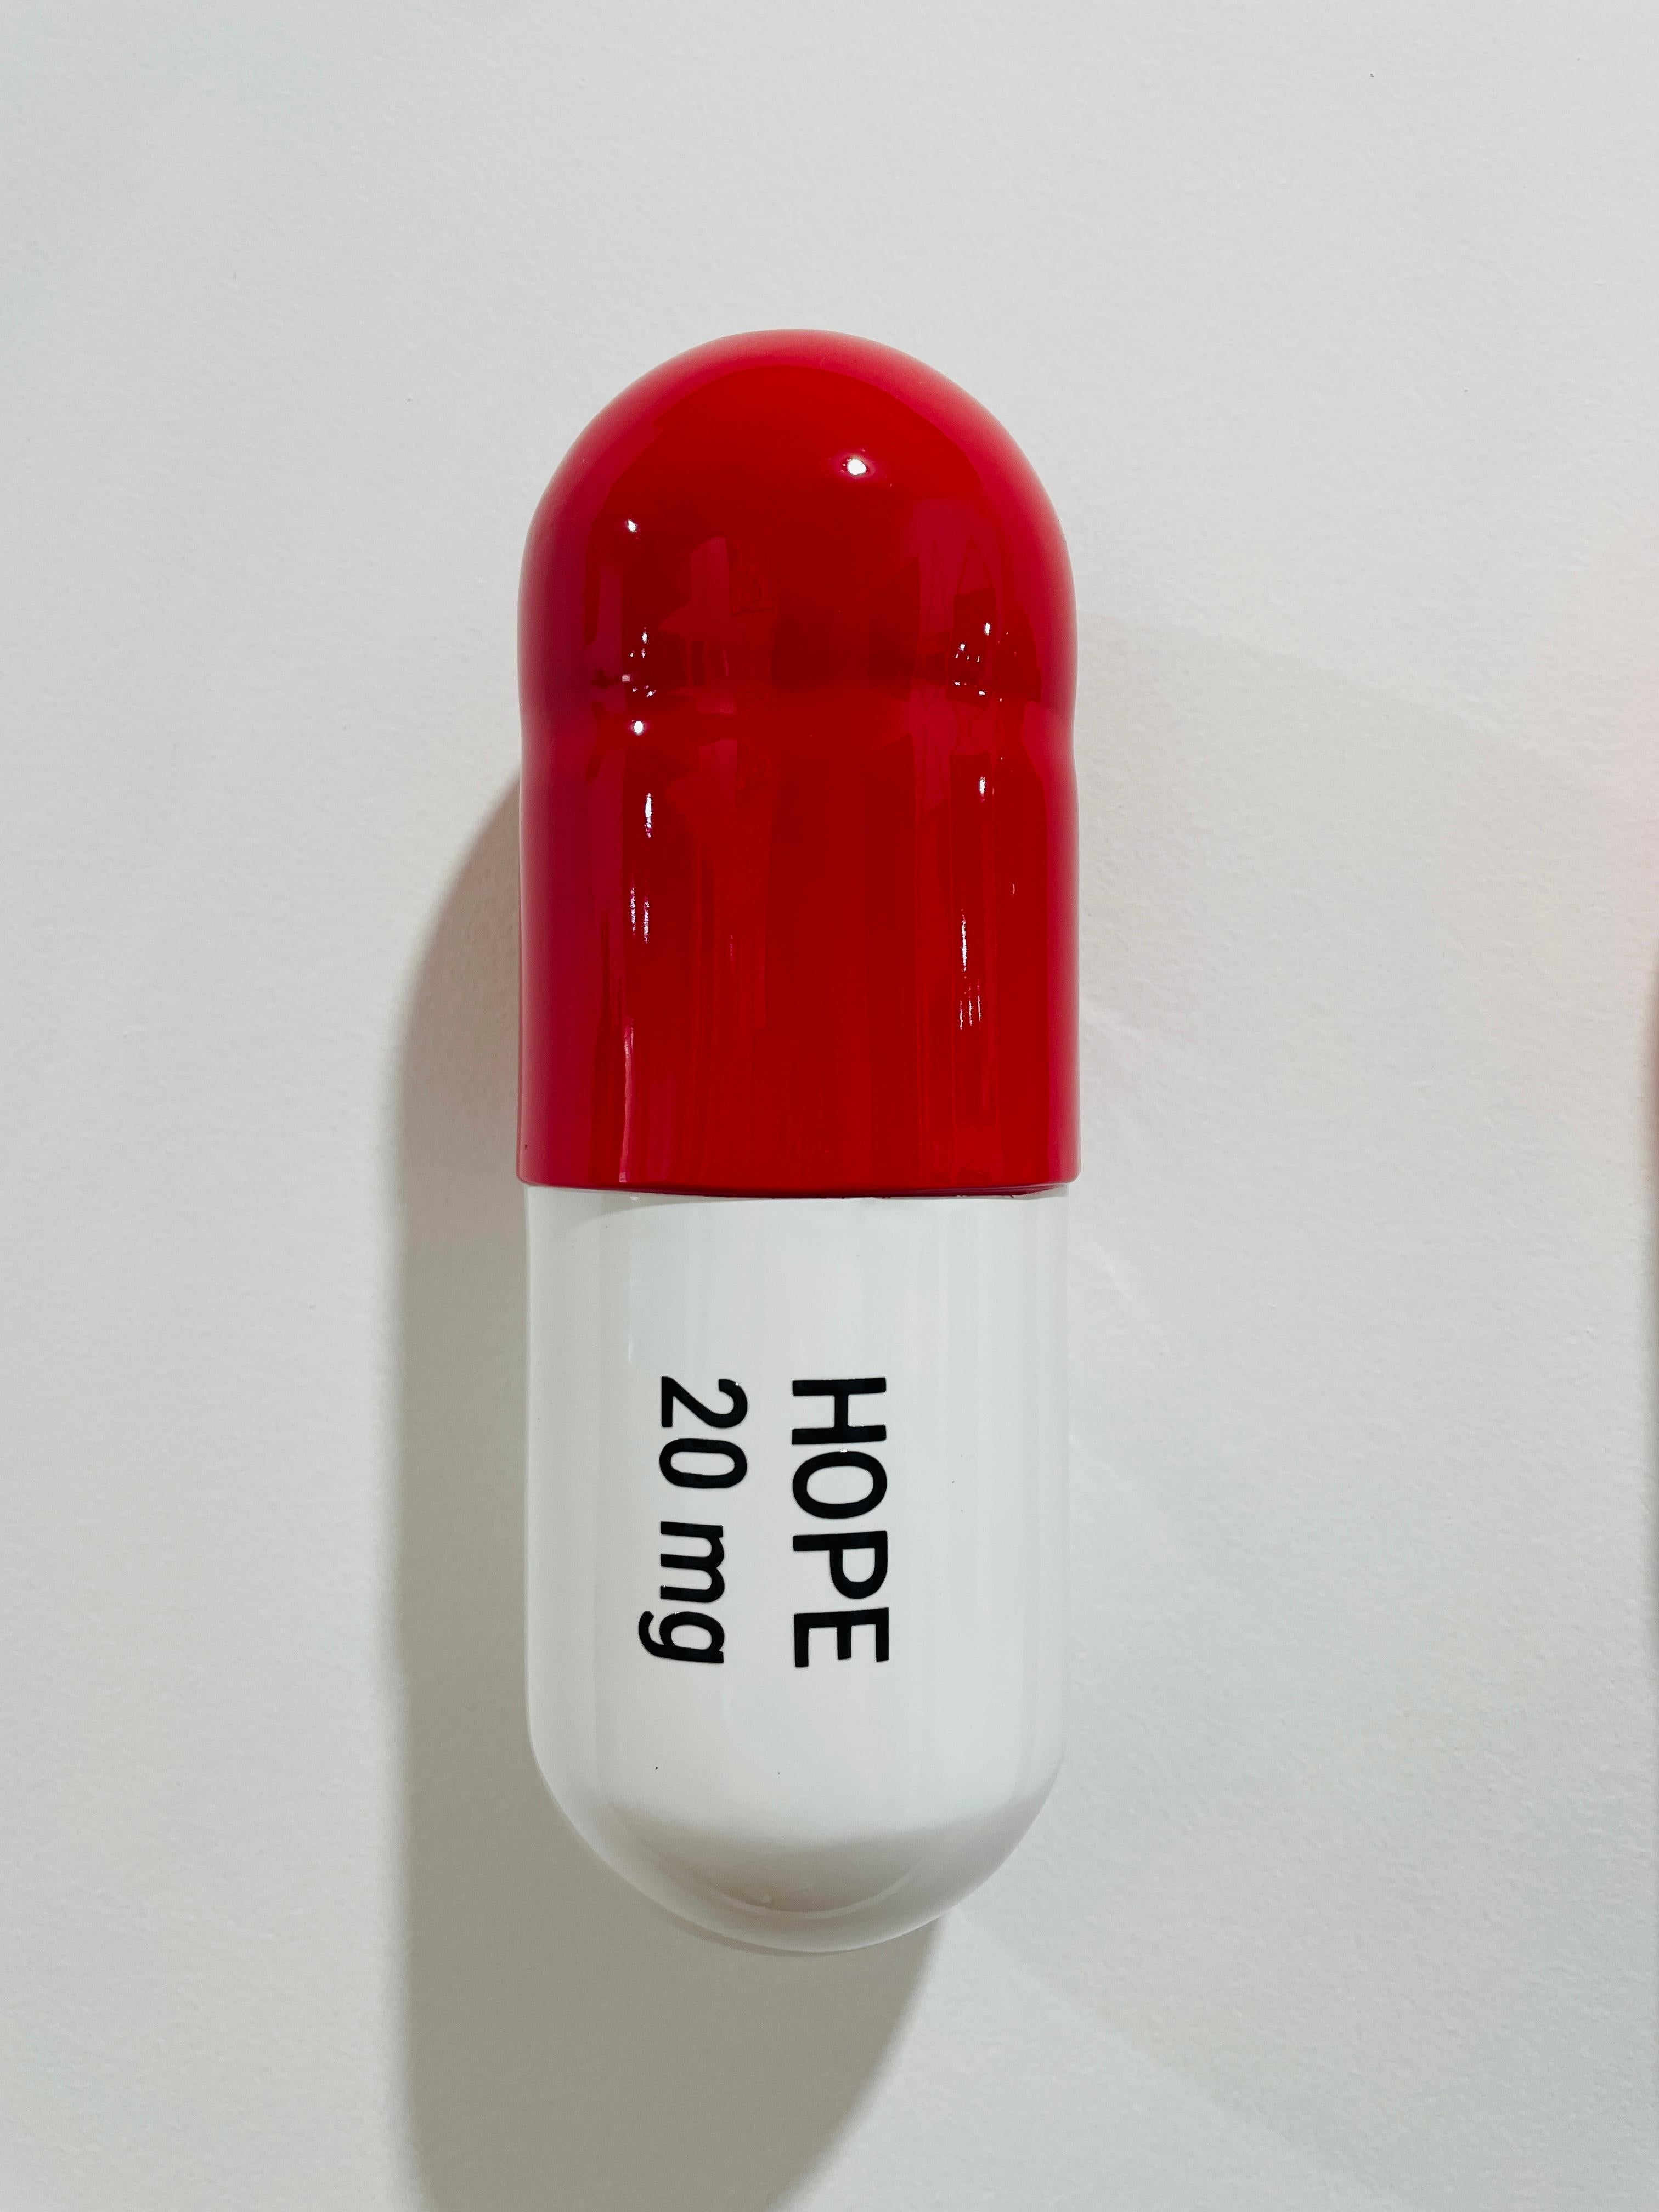 20 MG Hope Freedom pill Combo (red, orange, white) - figurative sculpture - Gray Still-Life Sculpture by Tal Nehoray